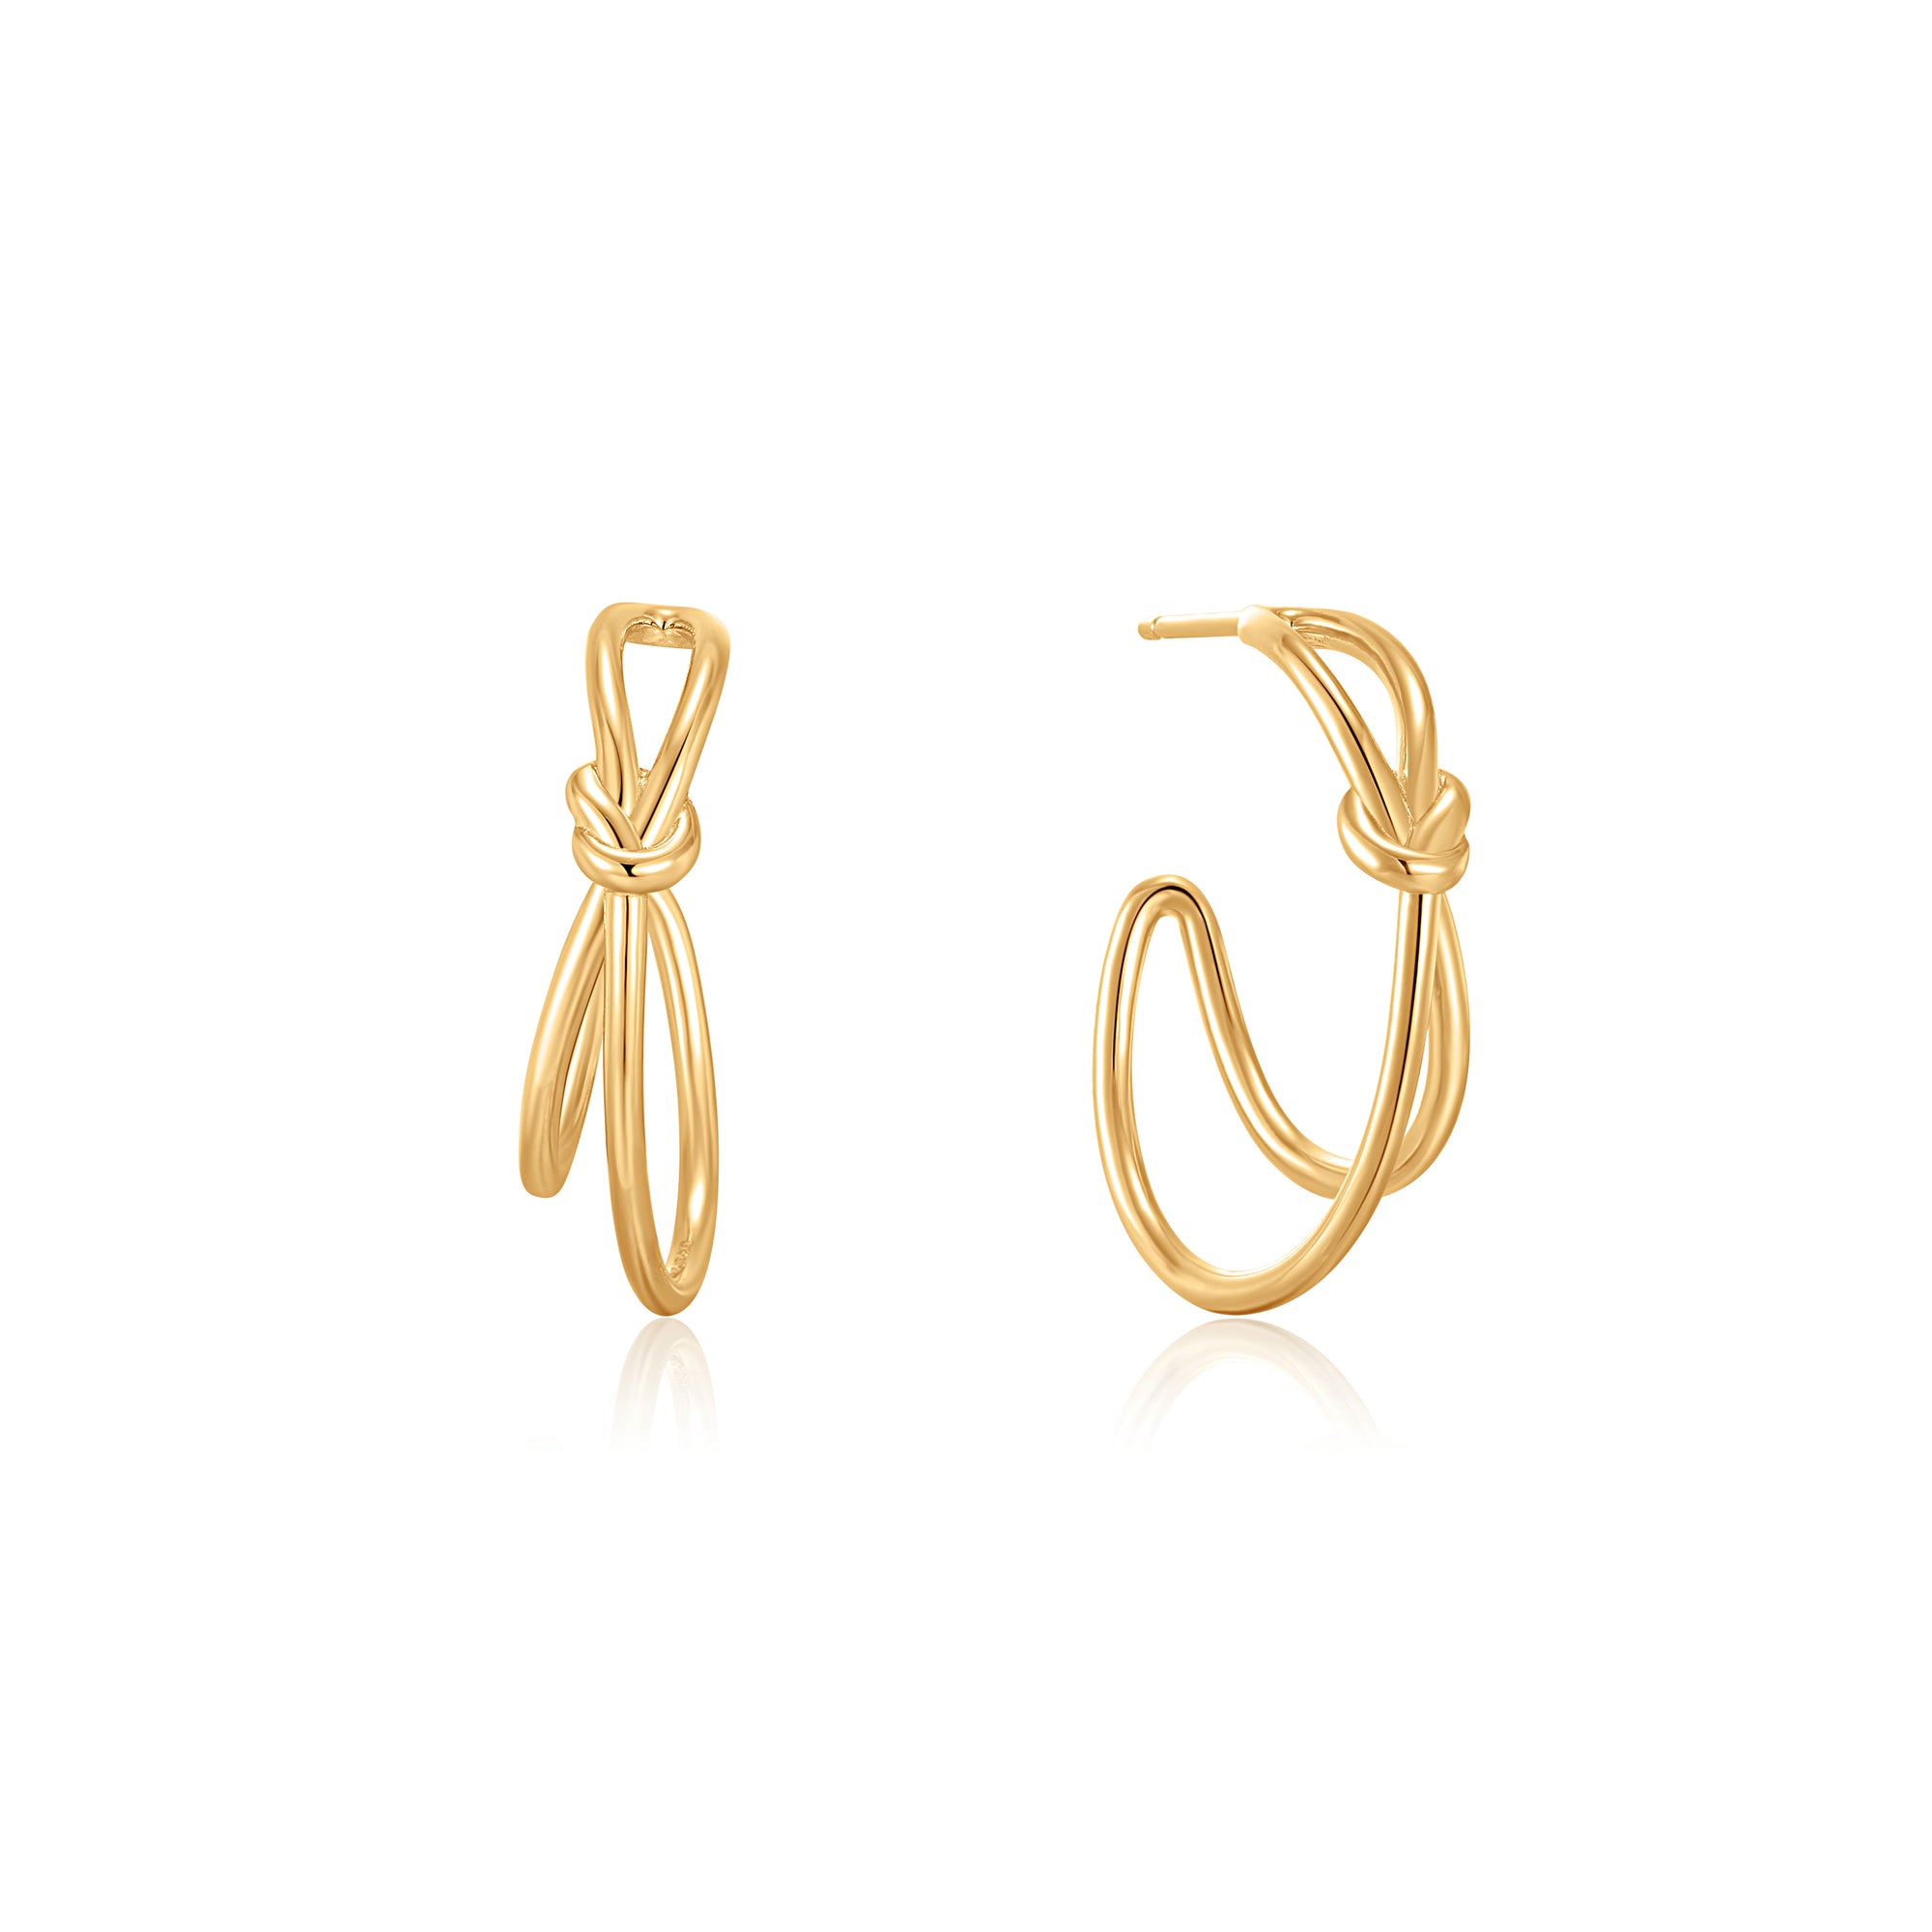 ANIA HAIE ANIA HAIE - Gold Knot Stud Hoop Earrings available at The Good Life Boutique